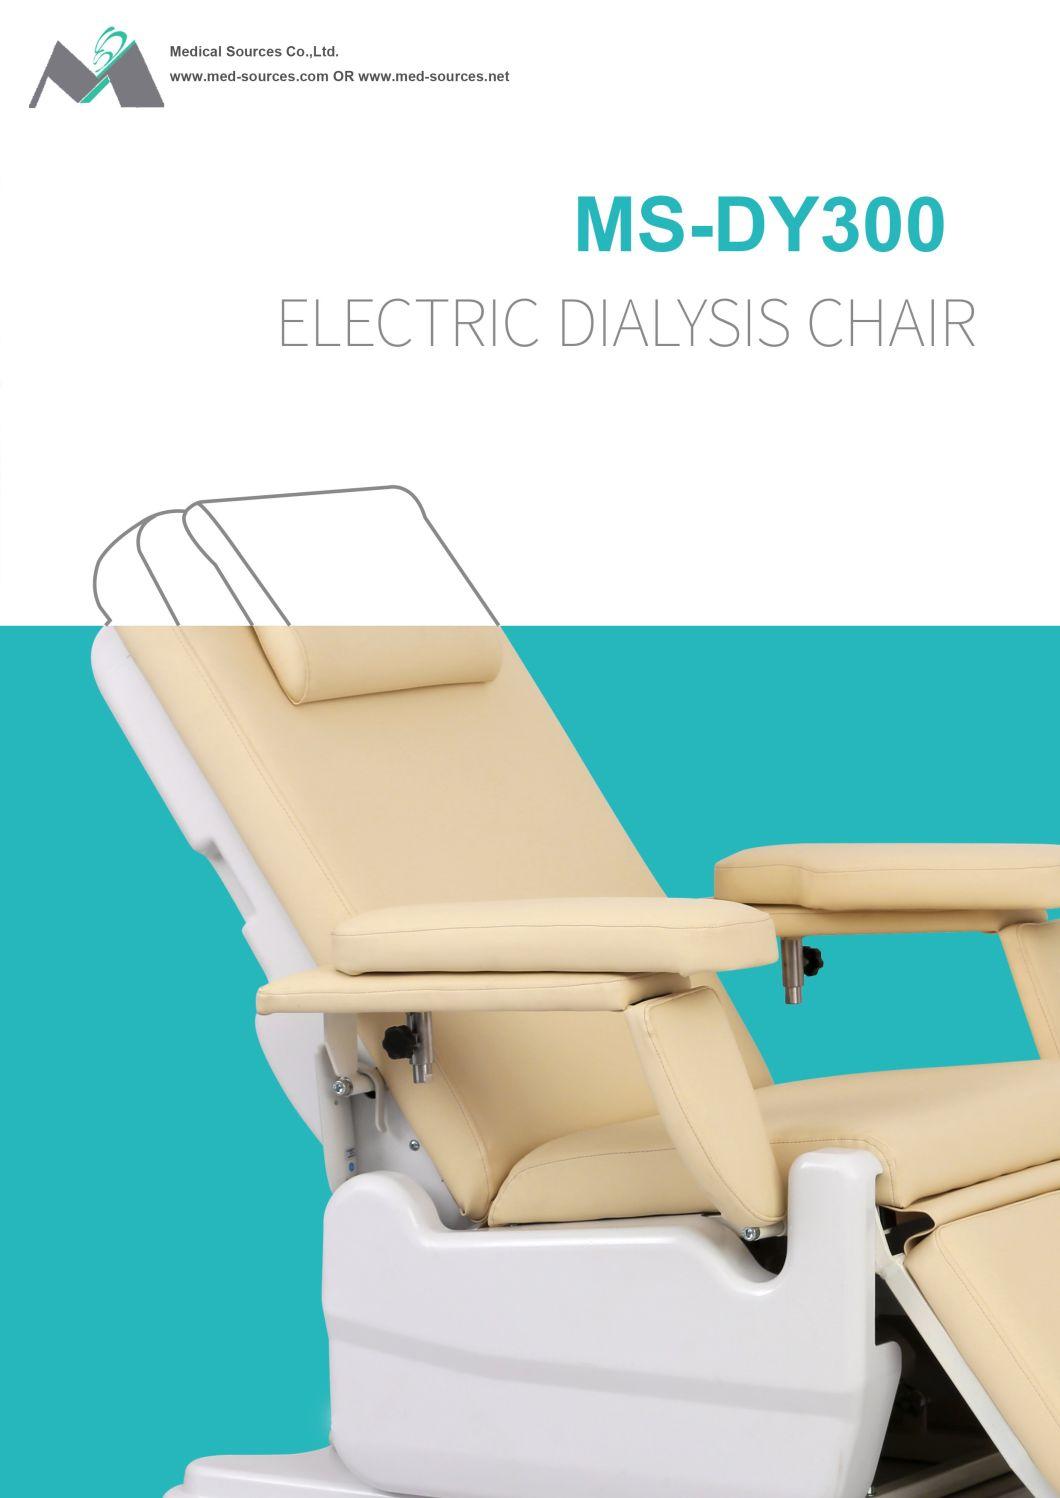 Ms-Dy300 Hospital Comfortable Electric Dialysis Chair